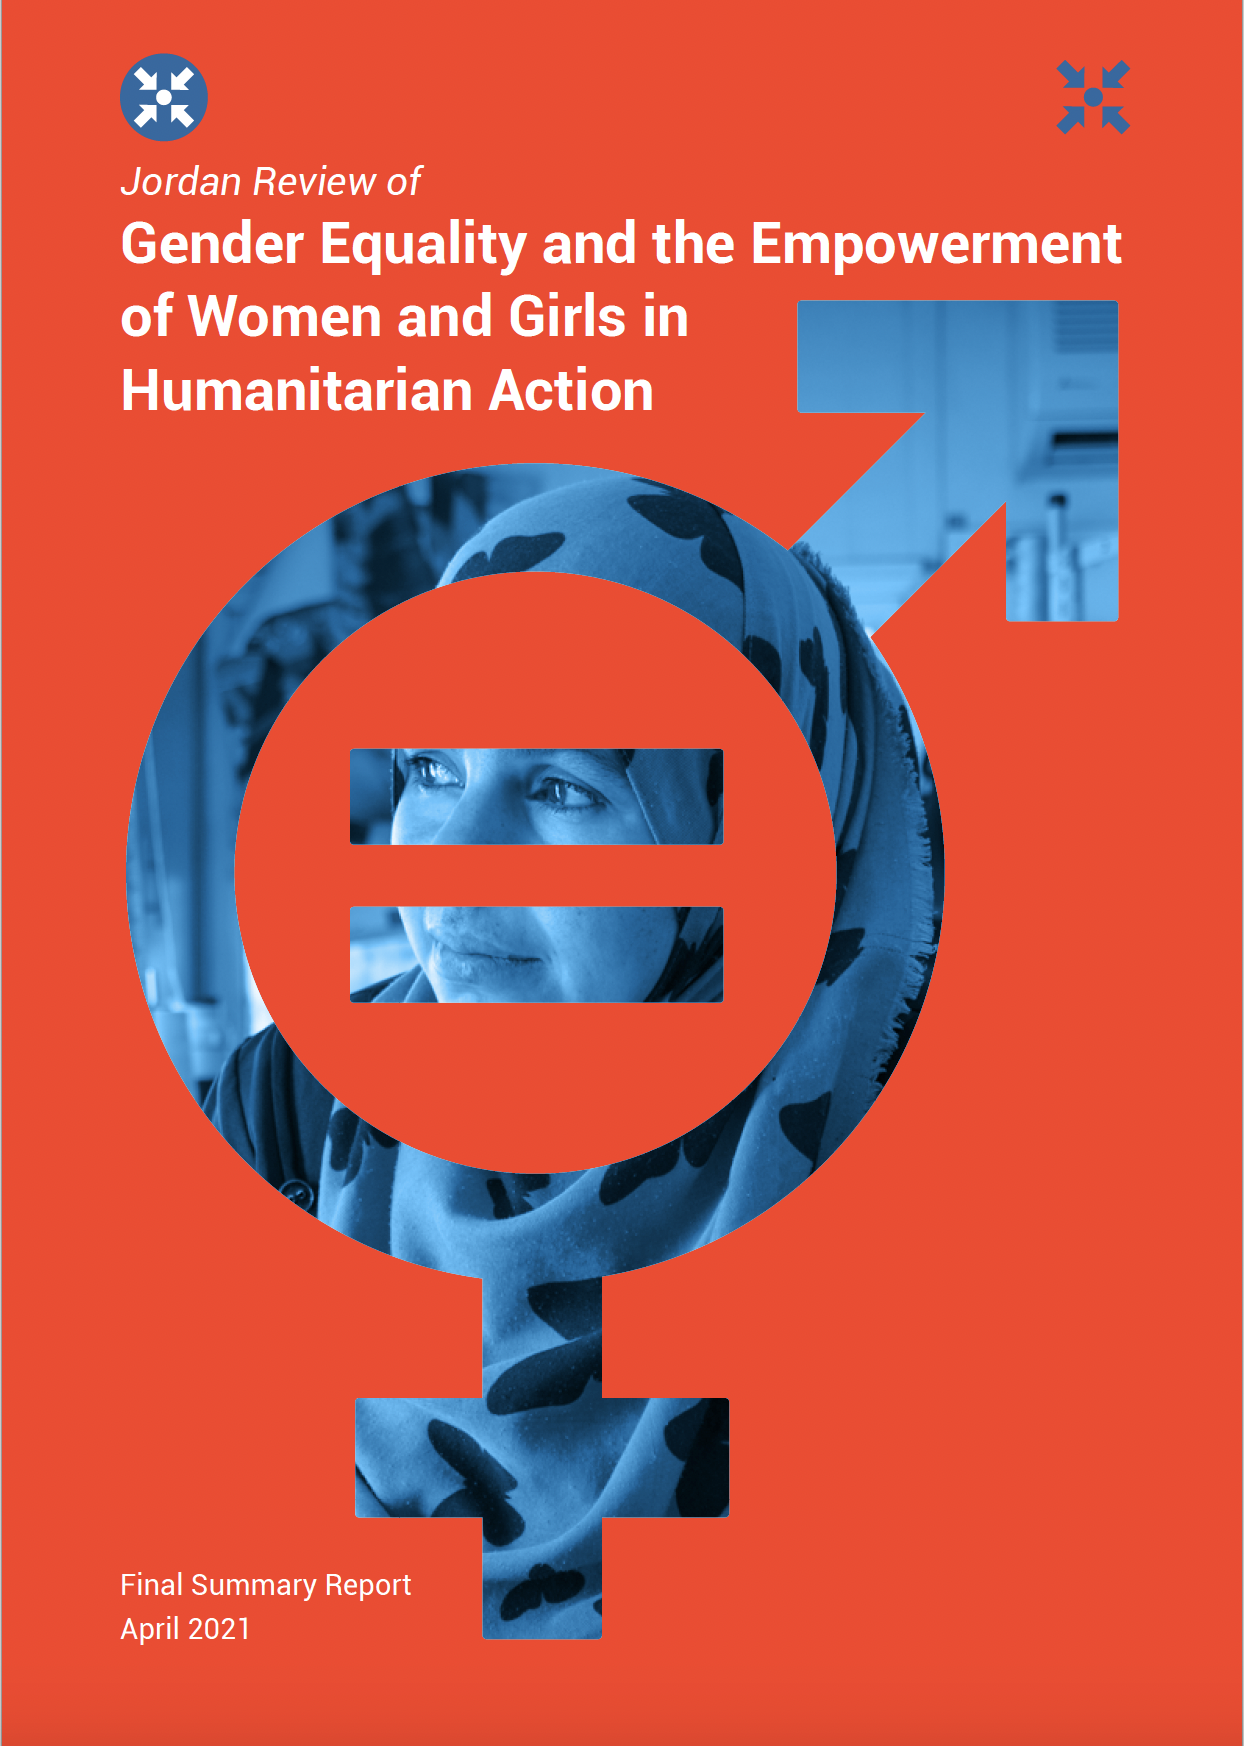 Jordan Review of Gender Equality and the Empowerment of Women and Girls in Humanitarian Action